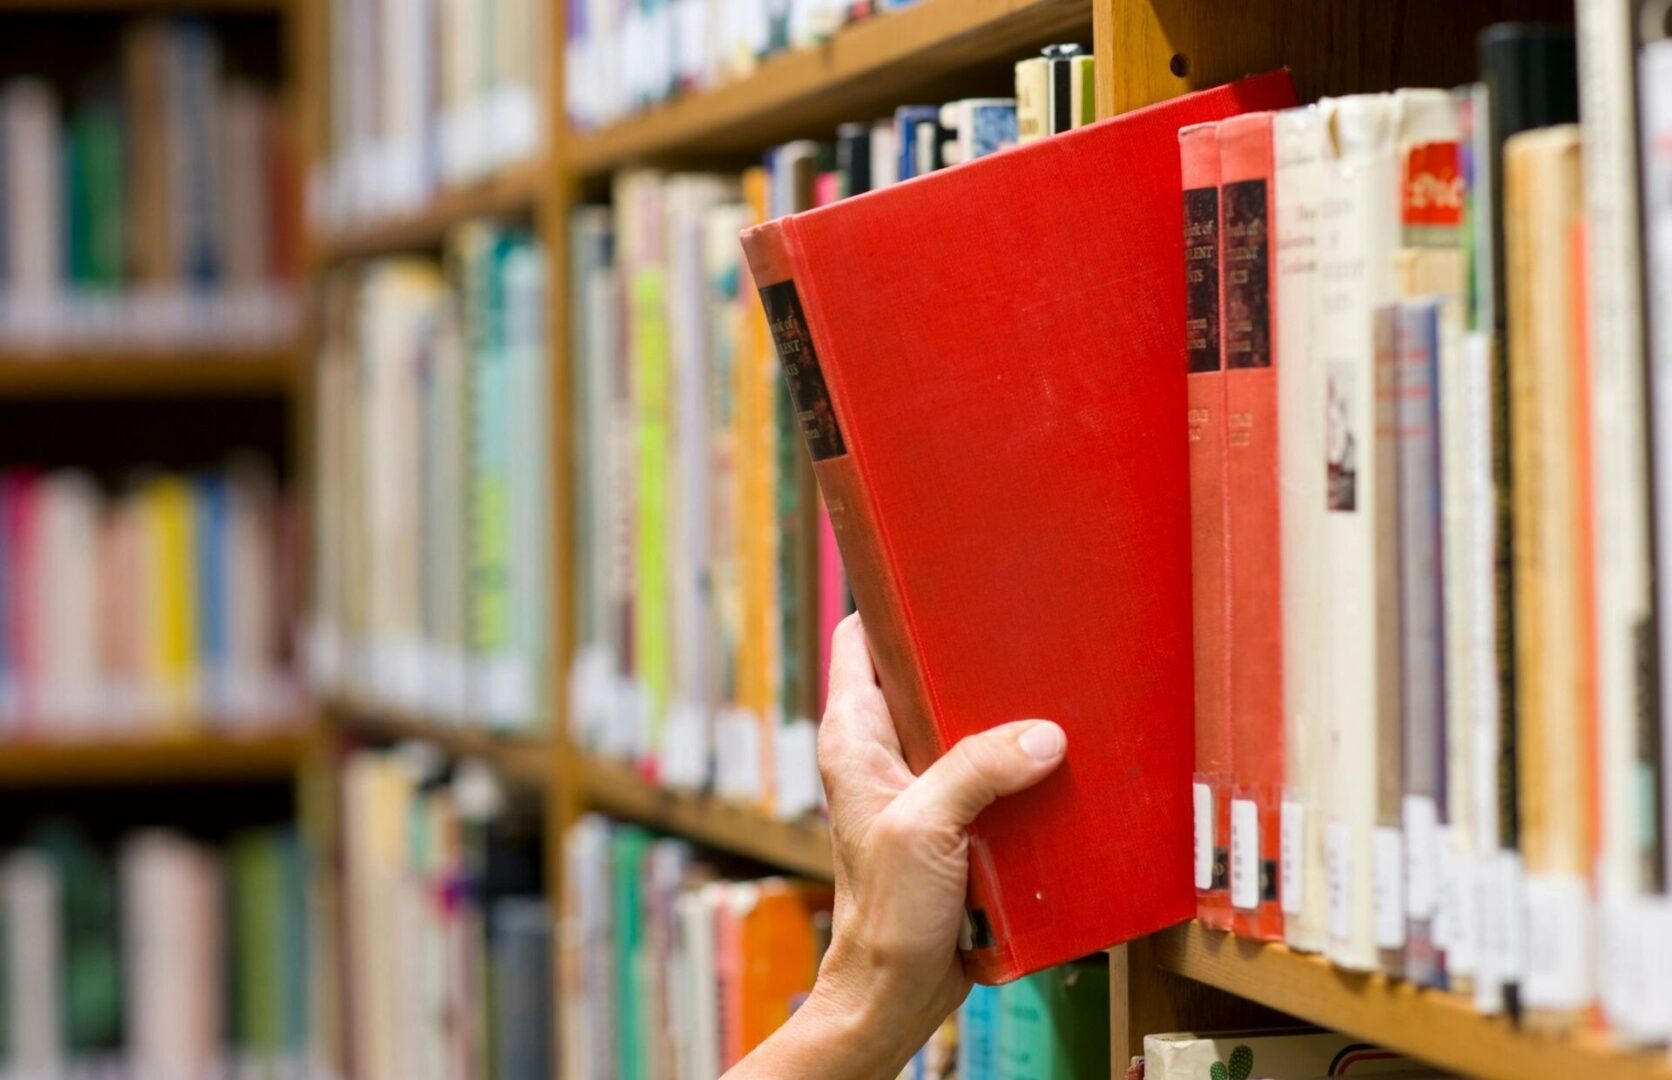 A person holding onto a red book in front of some books.